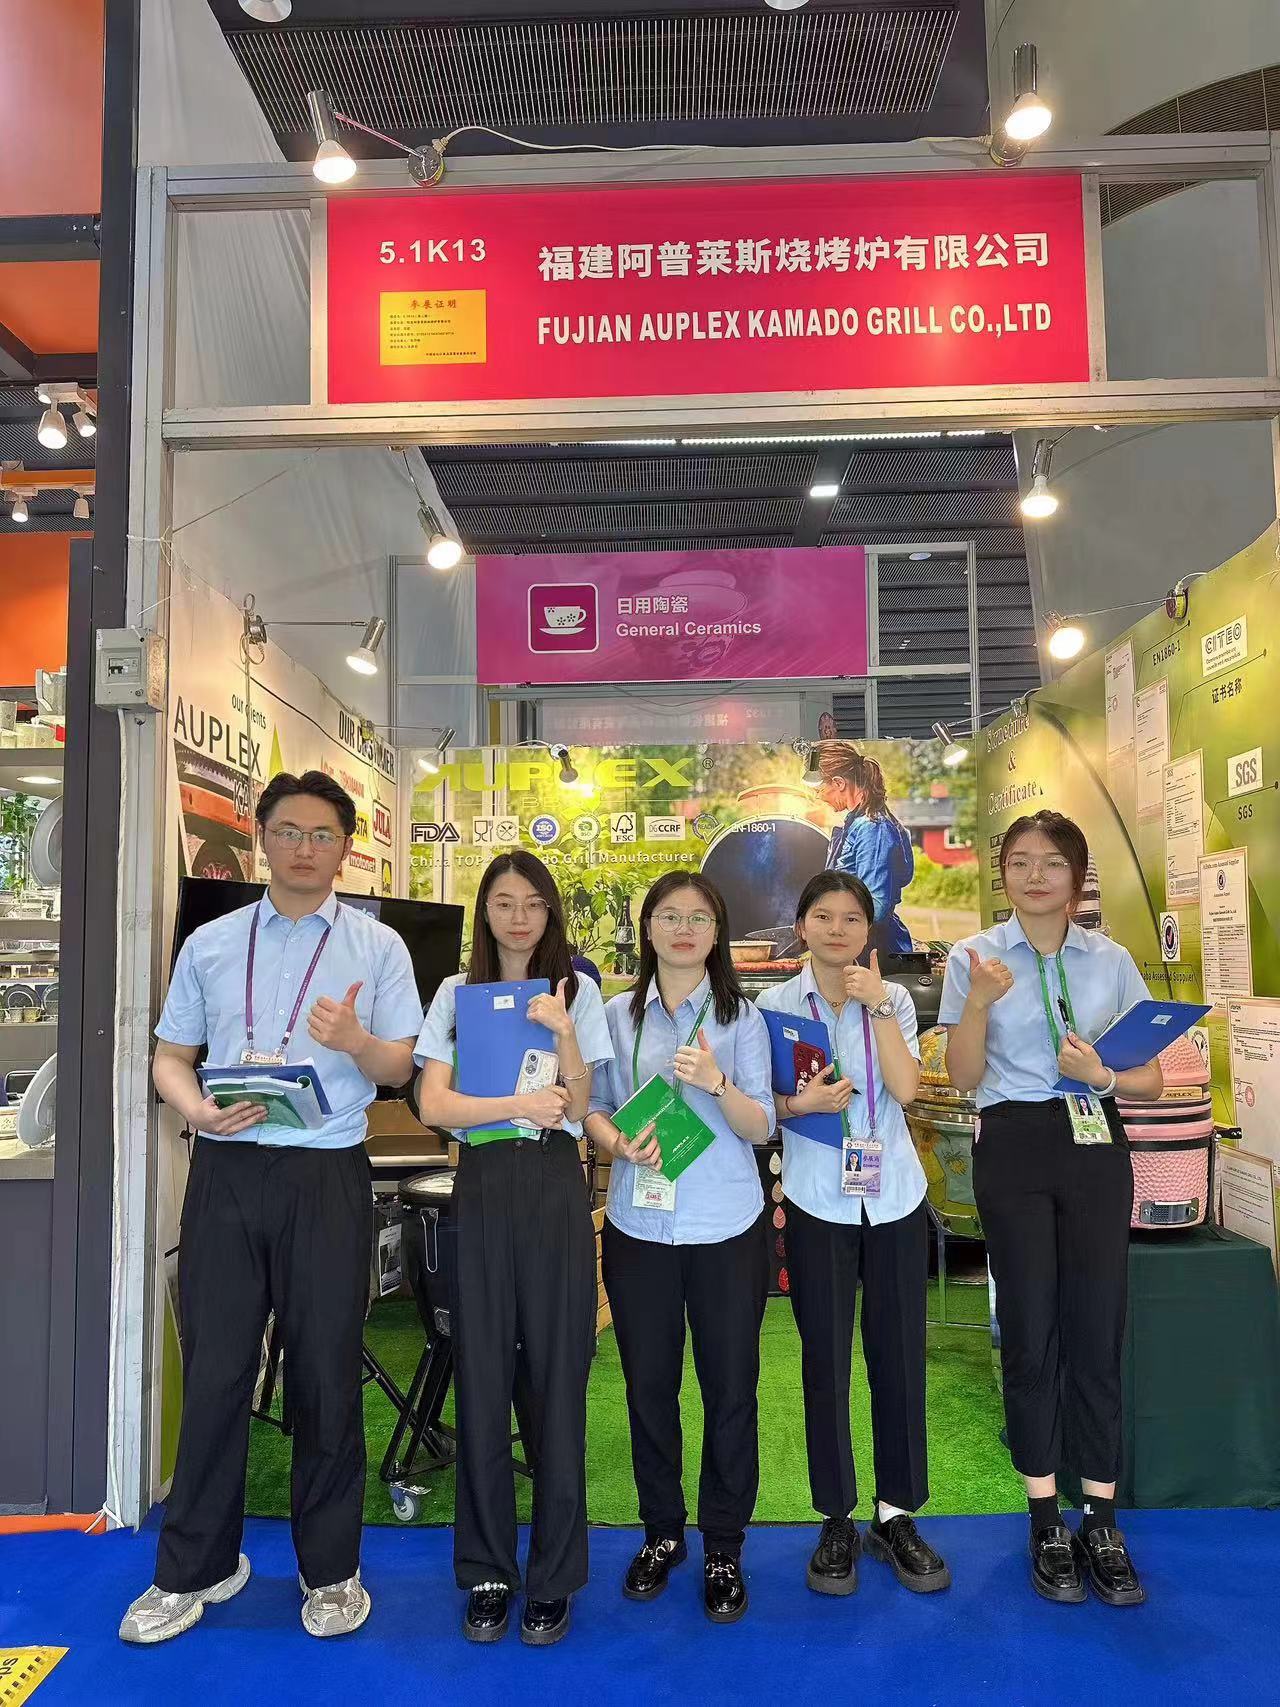 Welcome to visit our booth for ceramic grill.